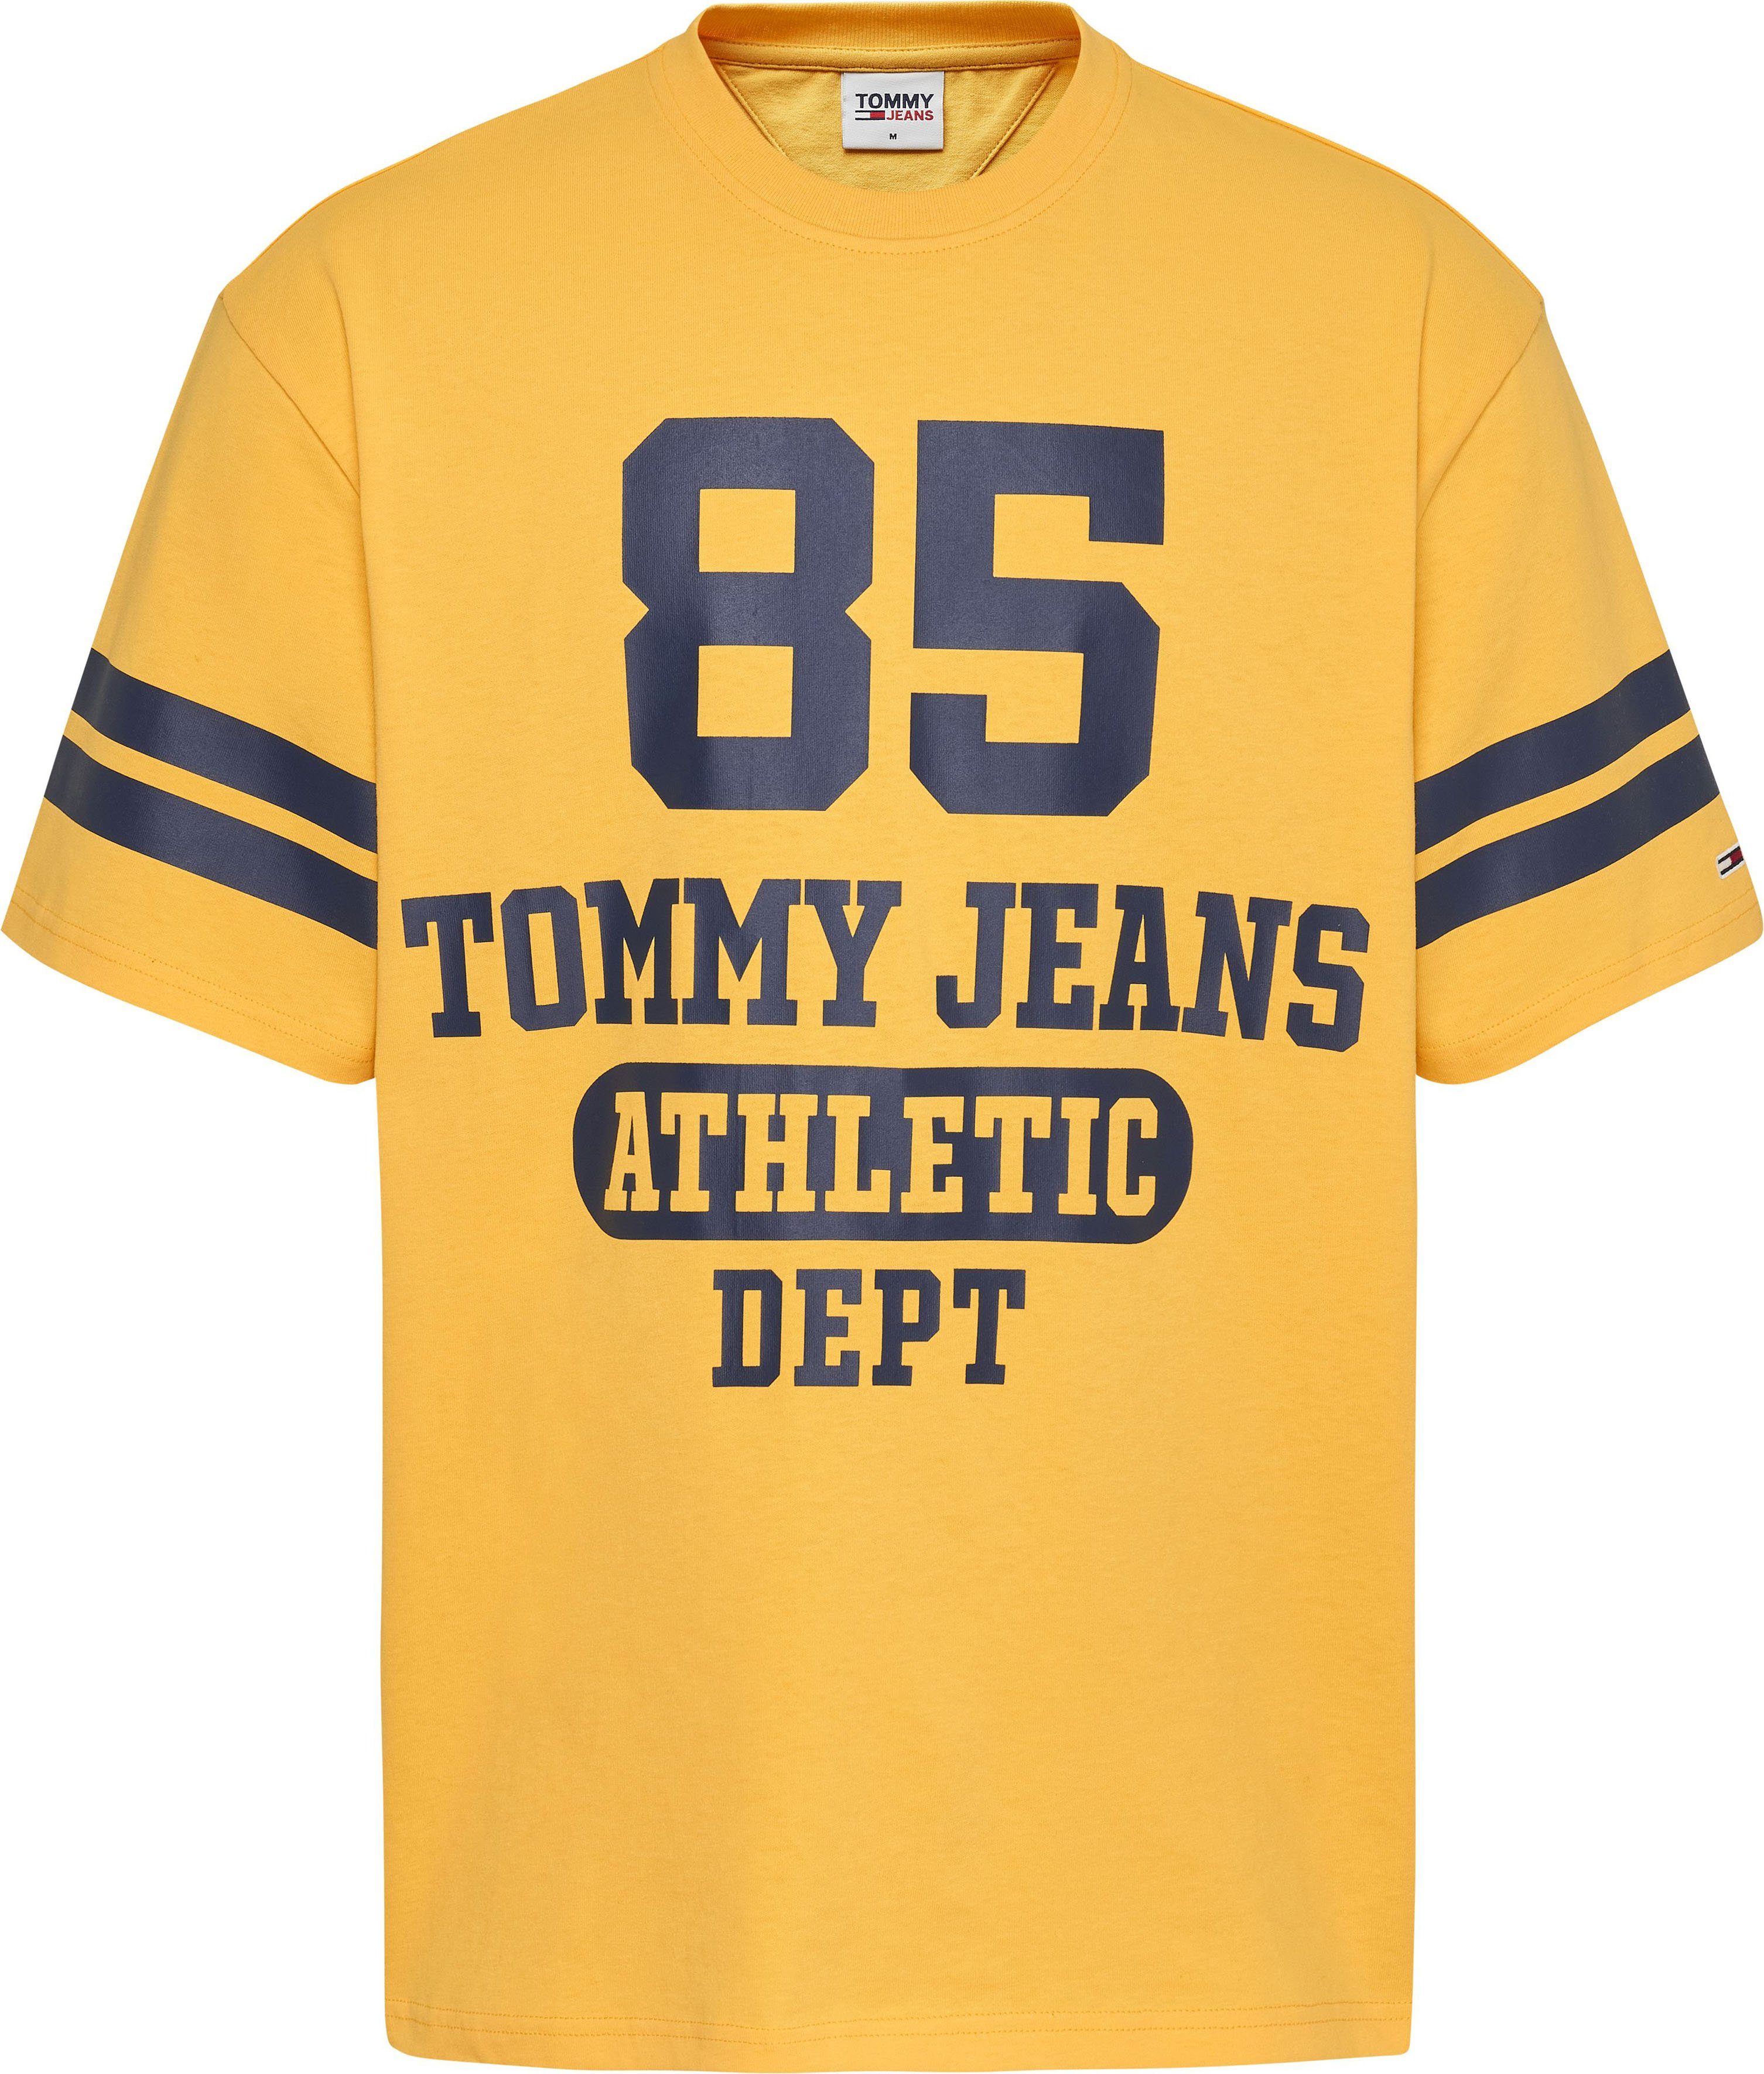 Tommy Jeans T-Shirt TJM 85 Yellow Warm LOGO COLLEGE SKATER